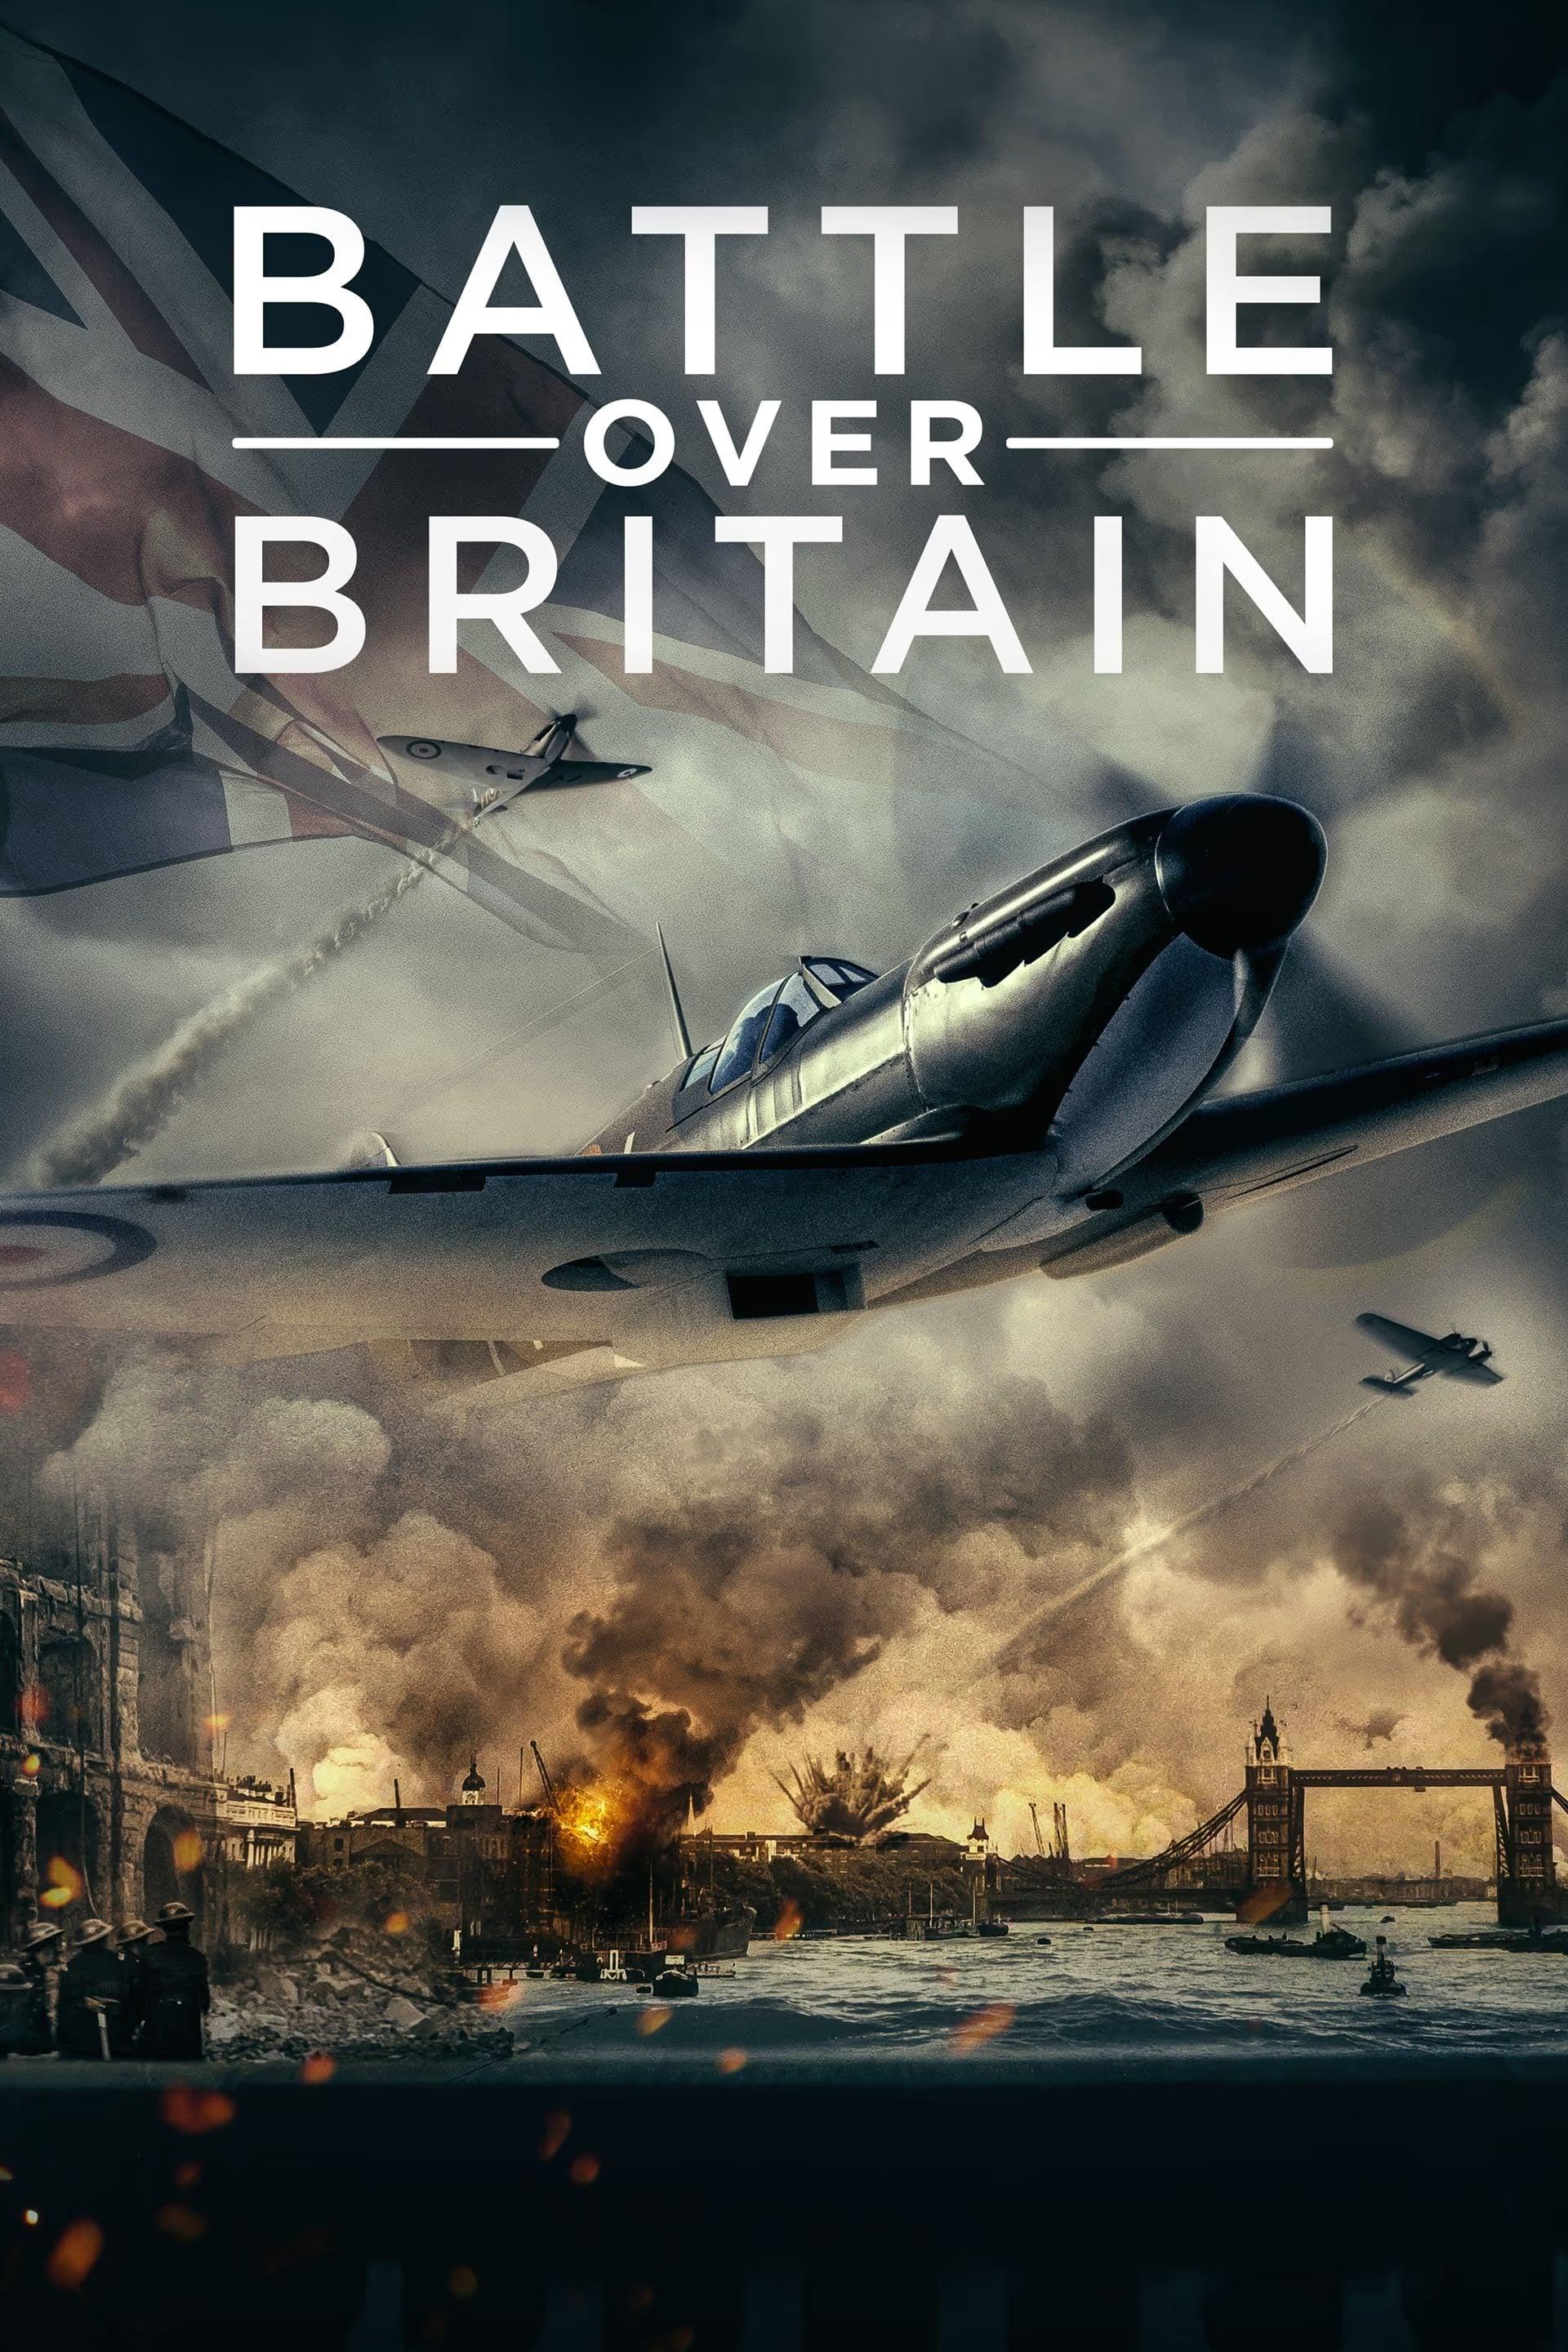 Movie poster of "Battle Over Britain"